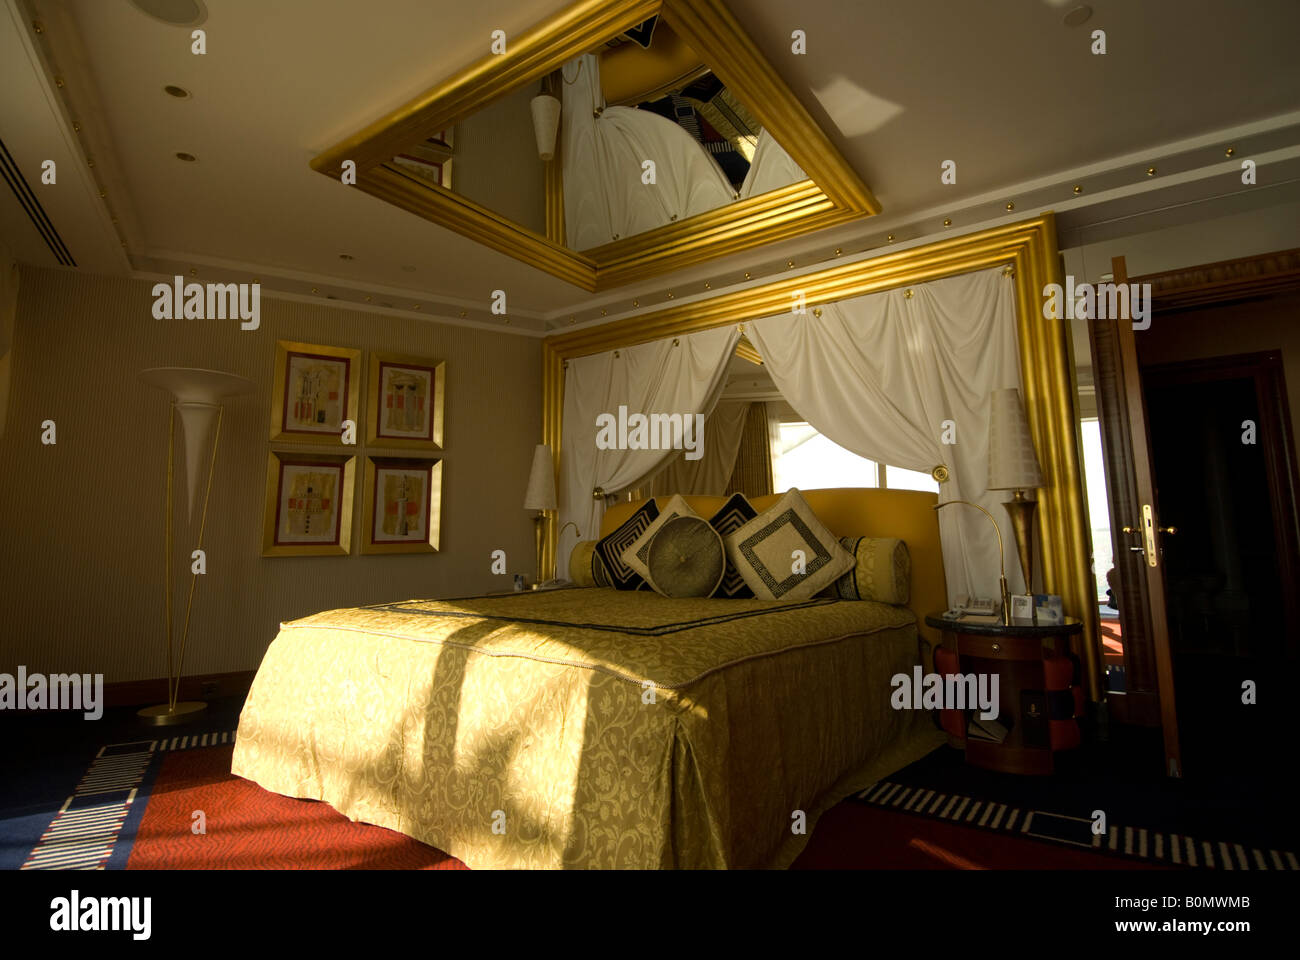 7 Star Hotel Stock Photos 7 Star Hotel Stock Images Alamy